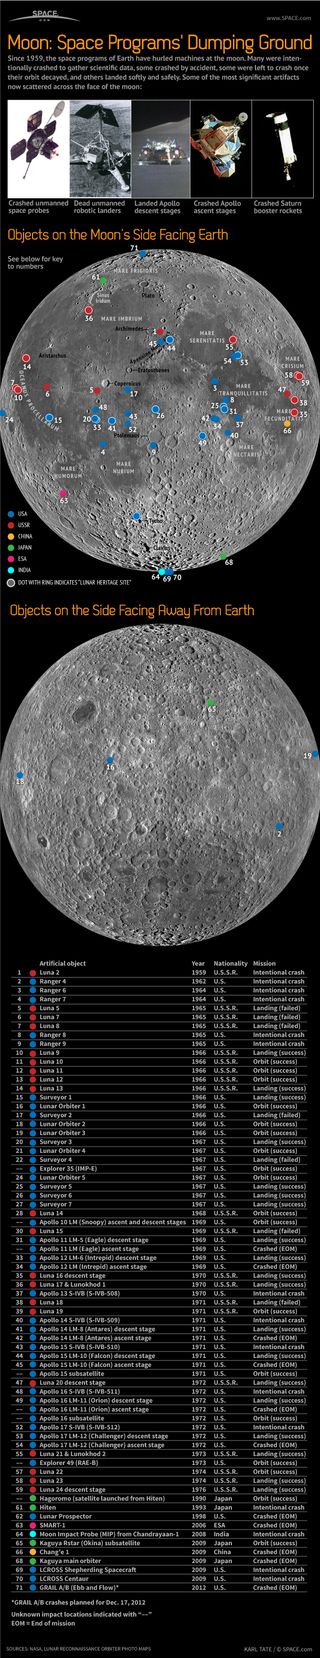 INFOGRAPHIC: Remains and wreckage from 71 space vehicles litter the surface of the moon